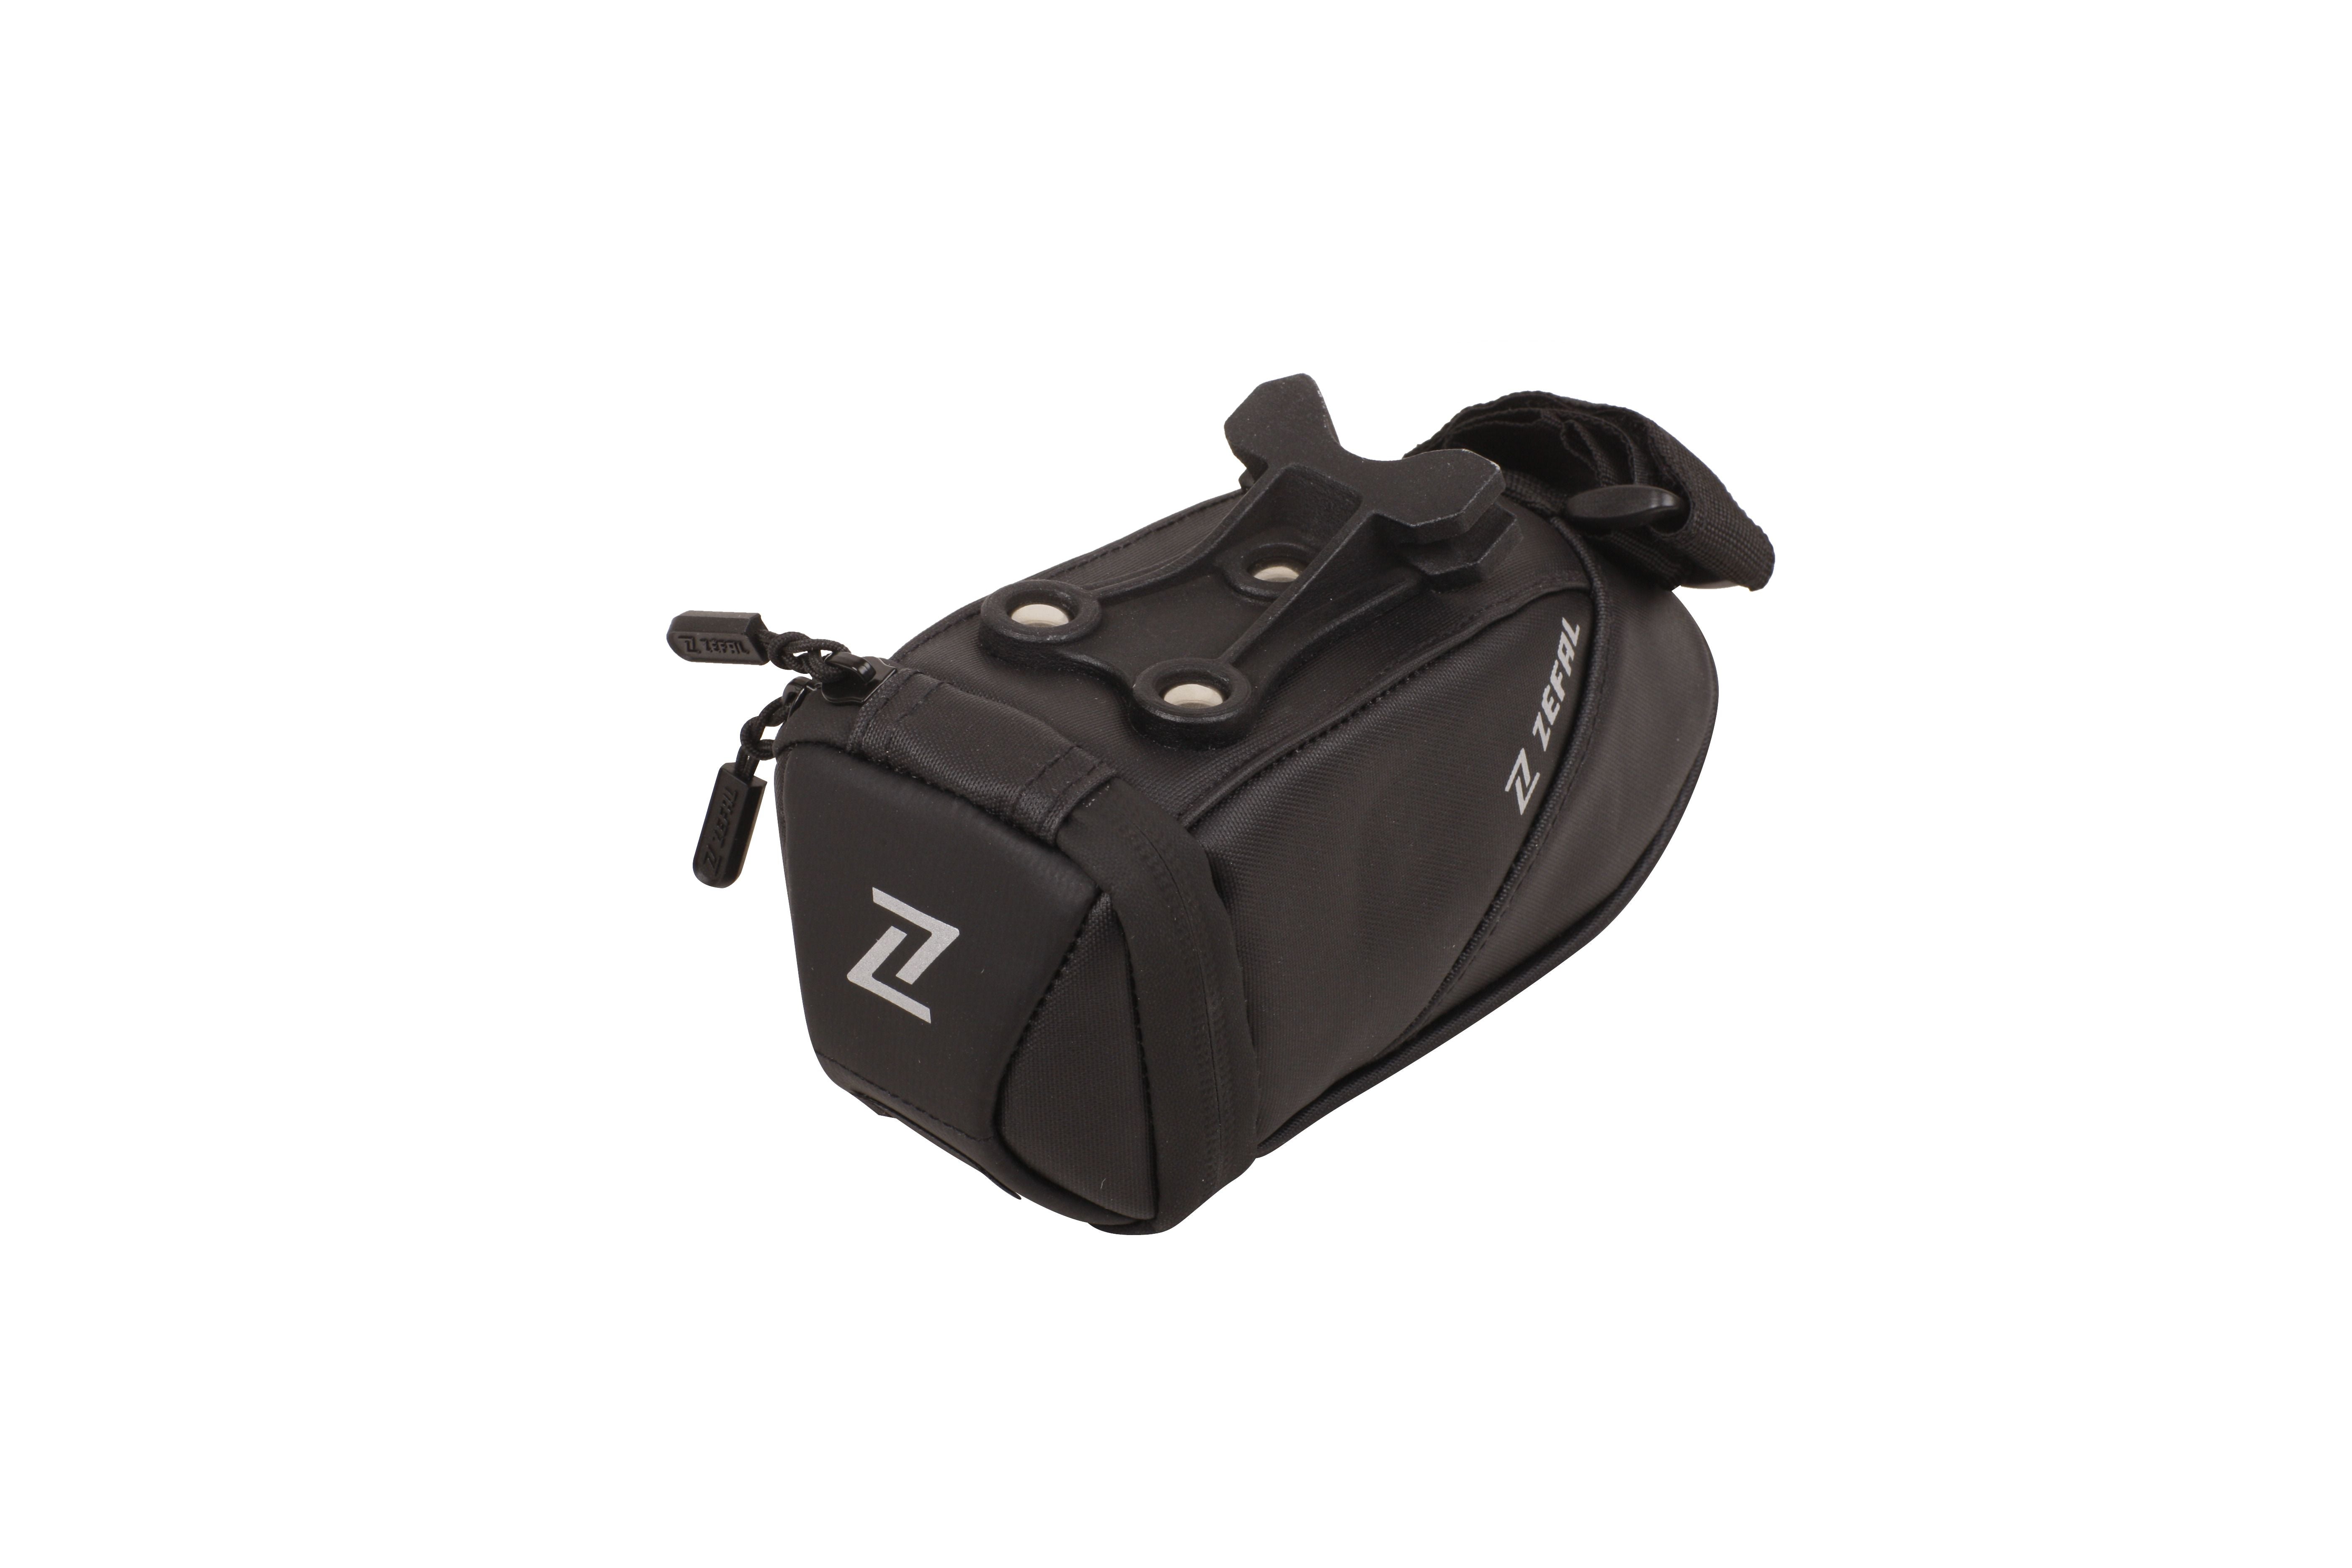 BOLSO PARA SILLIN ZEFAL MODELO IRON PACK 2 M-DS